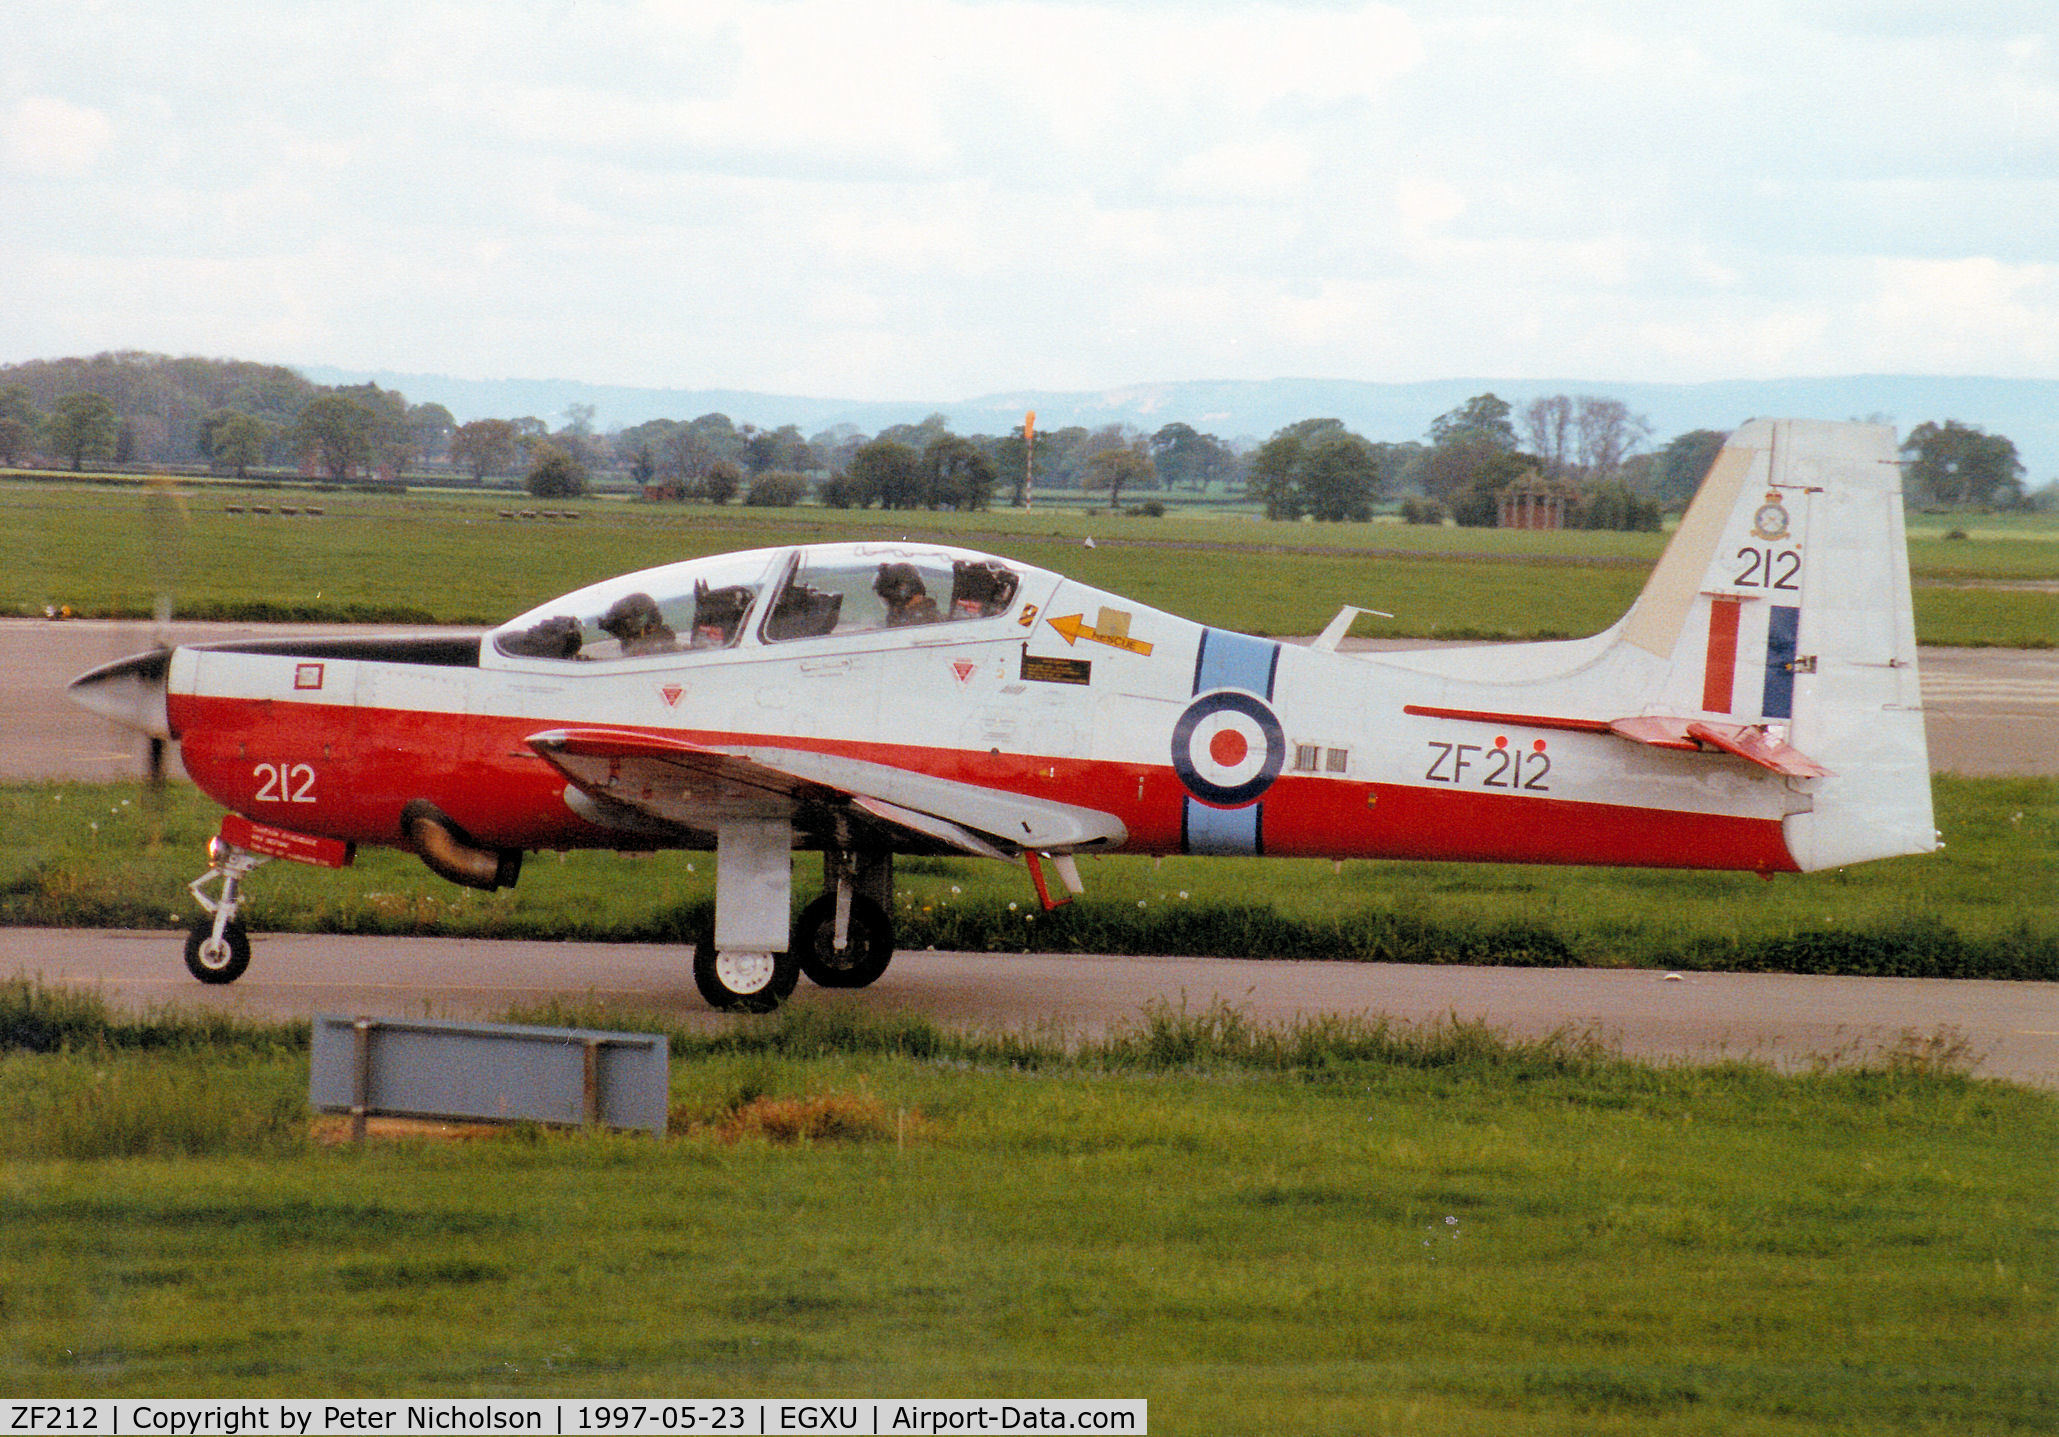 ZF212, 1989 Short S-312 Tucano T1 C/N S039/T37, Tucano T.1 of the RAF College at Cranwell as seen at RAF Linton-on-Ouse in May 1997.